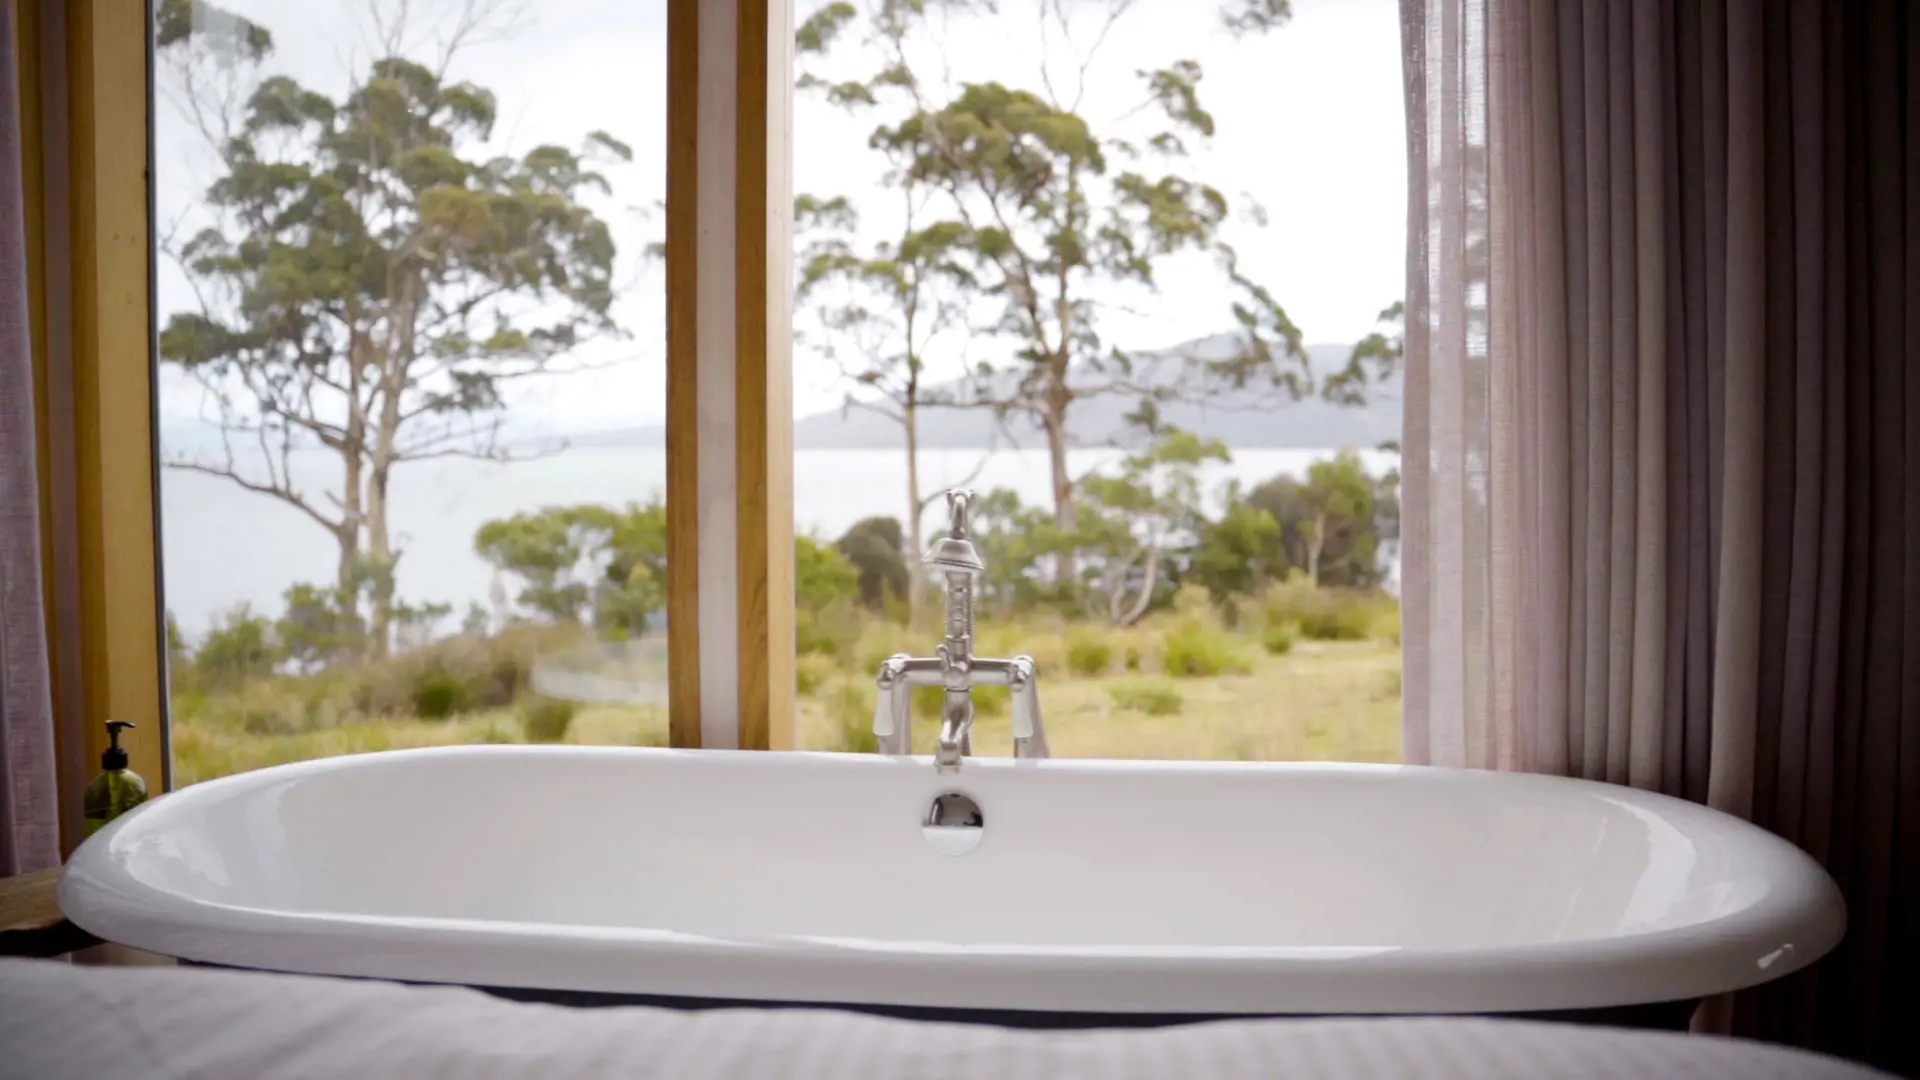 A large bath sits next to a window looking out through bushland to the sea.